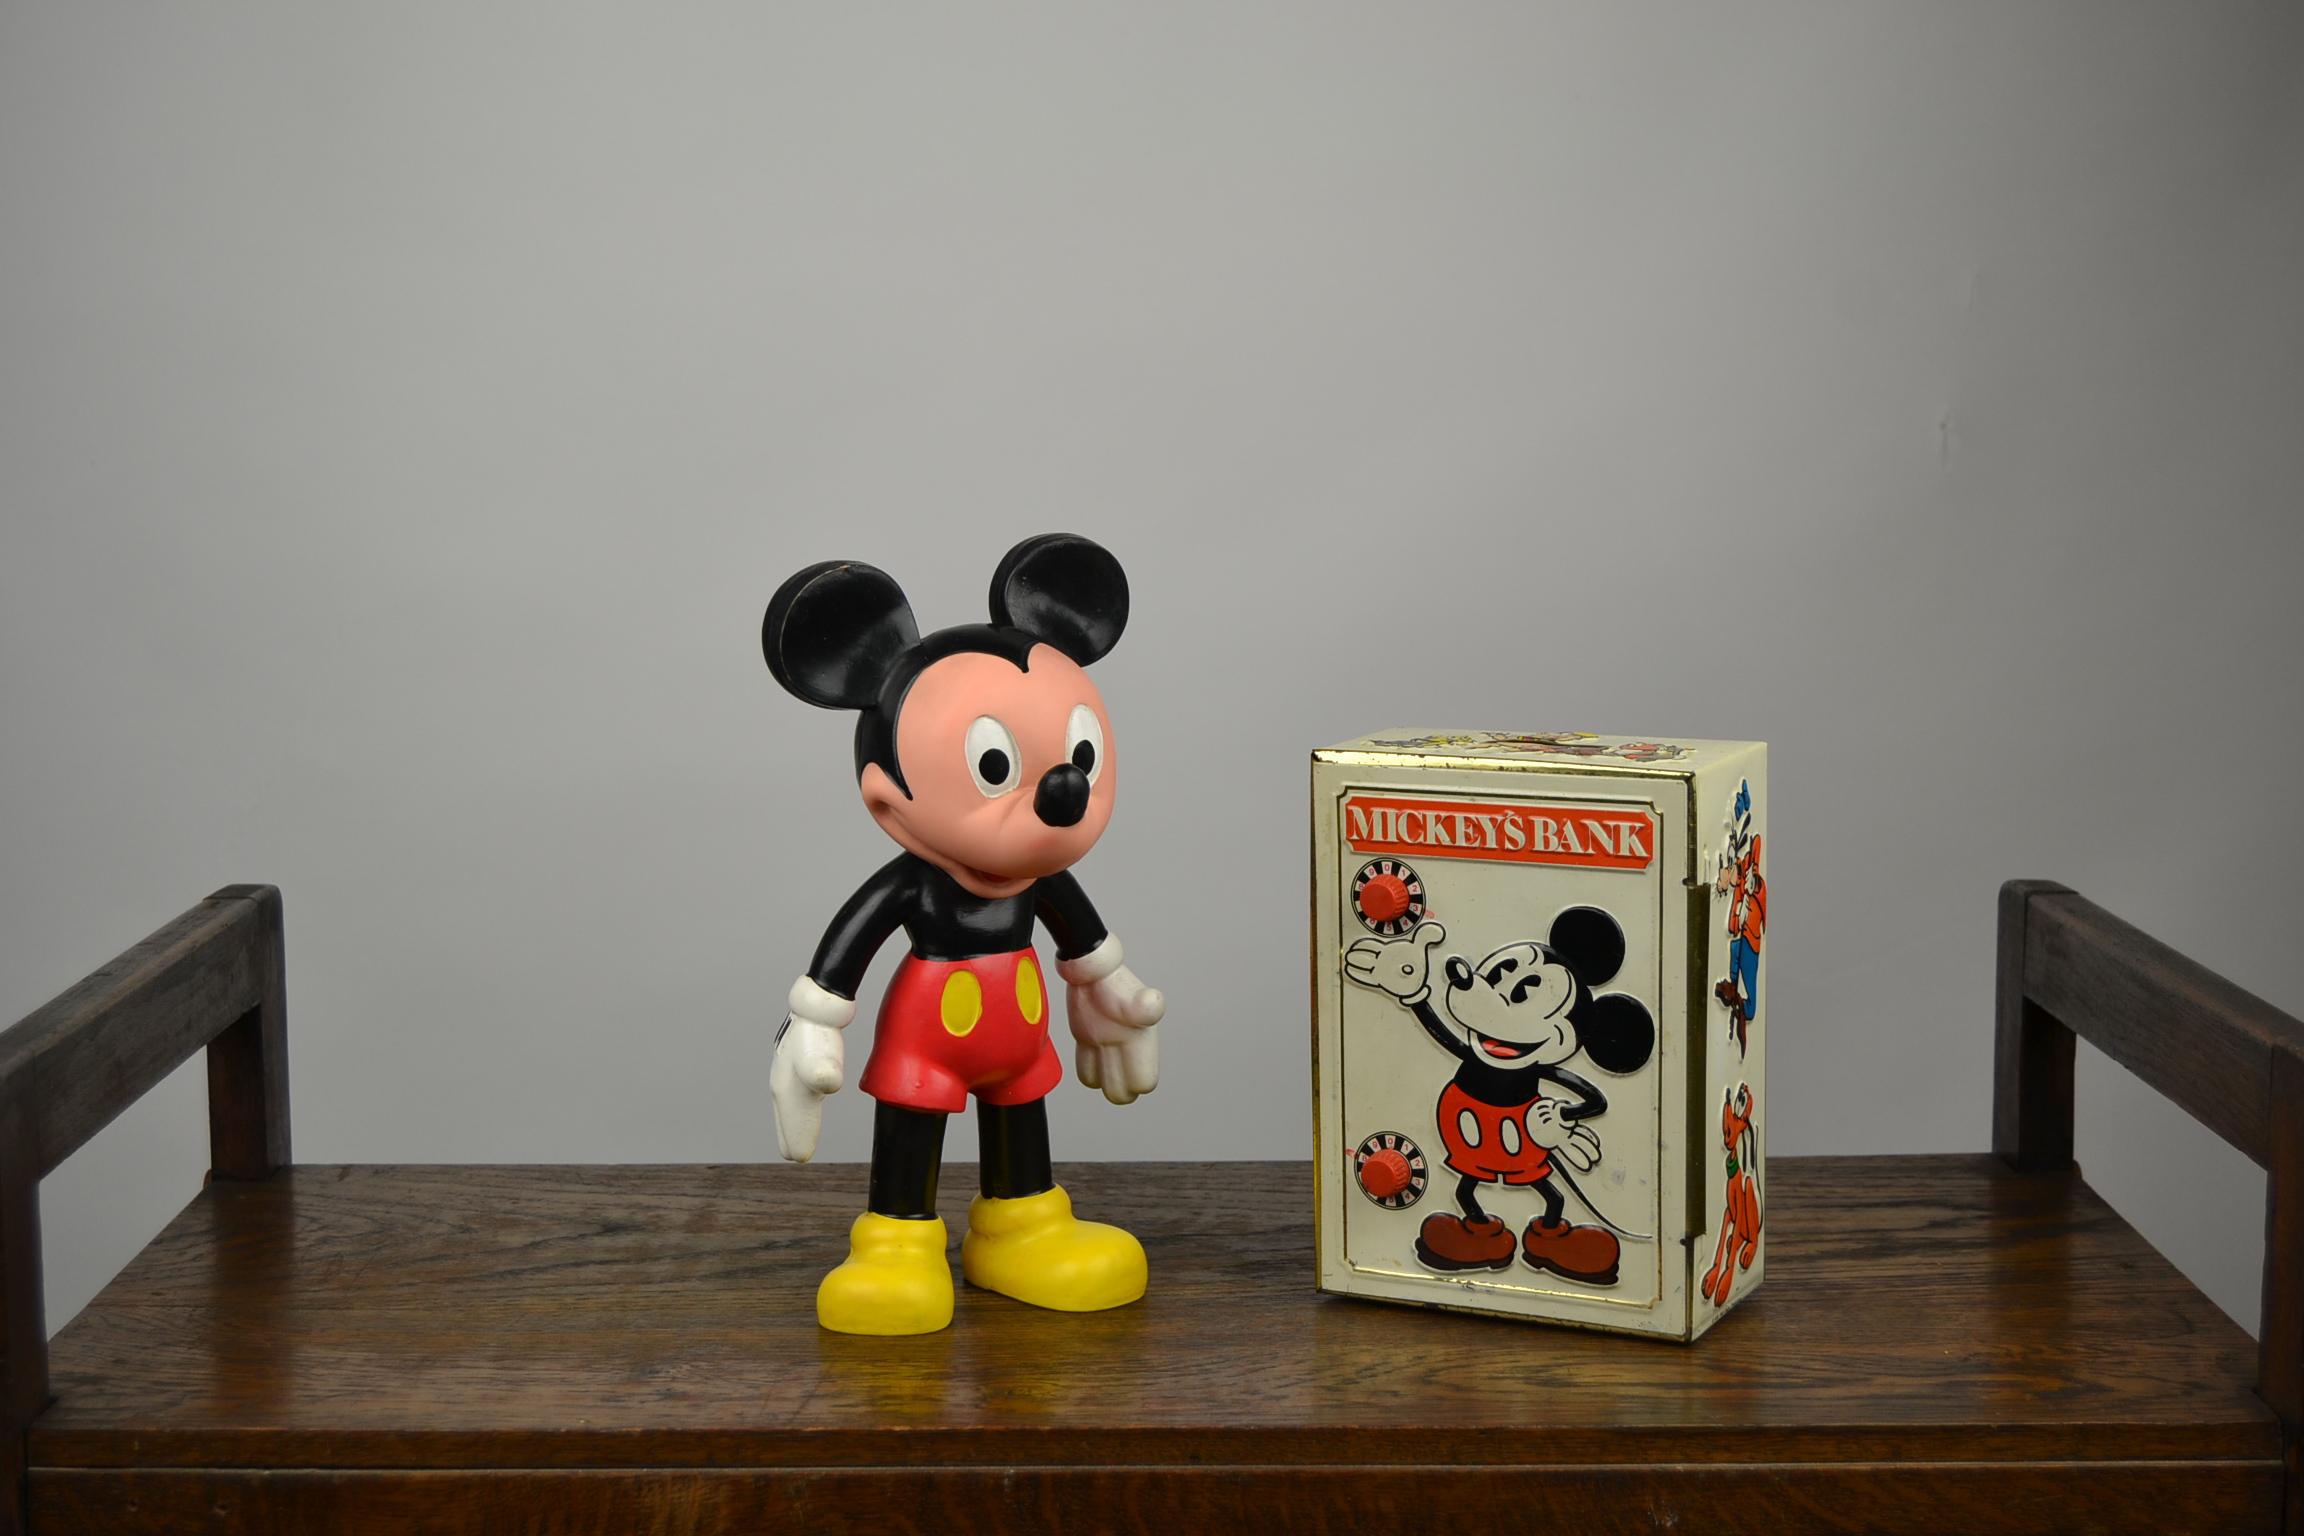 1959 Rubber Squeaky Toy Doll - Mid-20th Century Toy. 
Mickey Mouse Figurine by Walt Disney Productions. 
For his age still in very good beautiful condition. 
The rubber is not dried out or ripped and the sound when you squeeze the doll is still